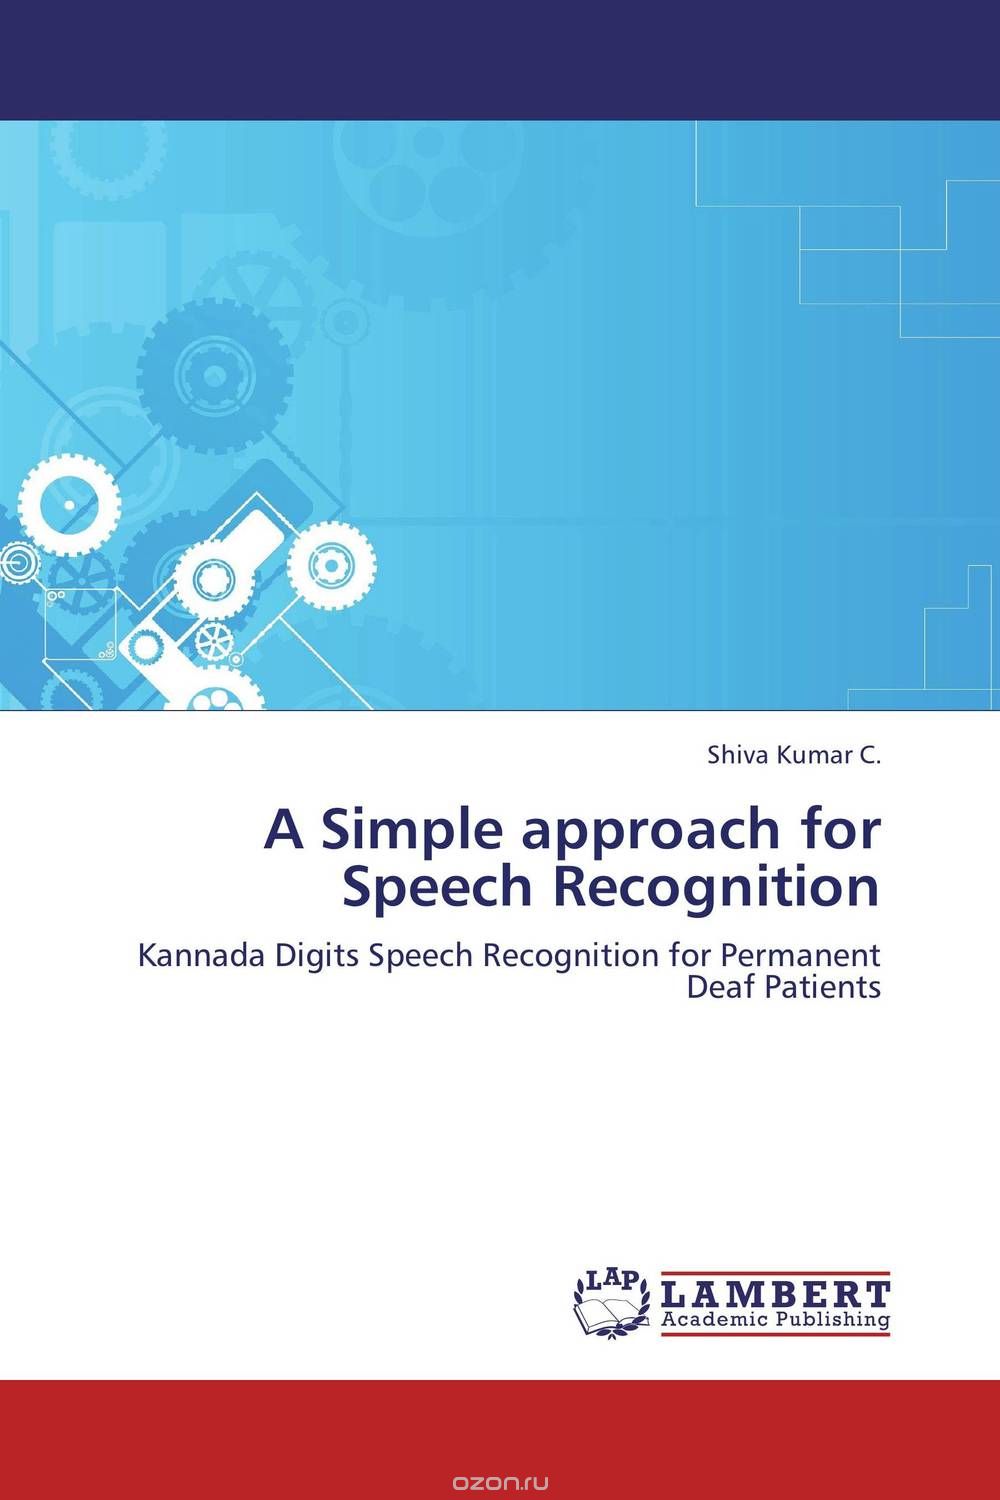 A Simple approach for Speech Recognition